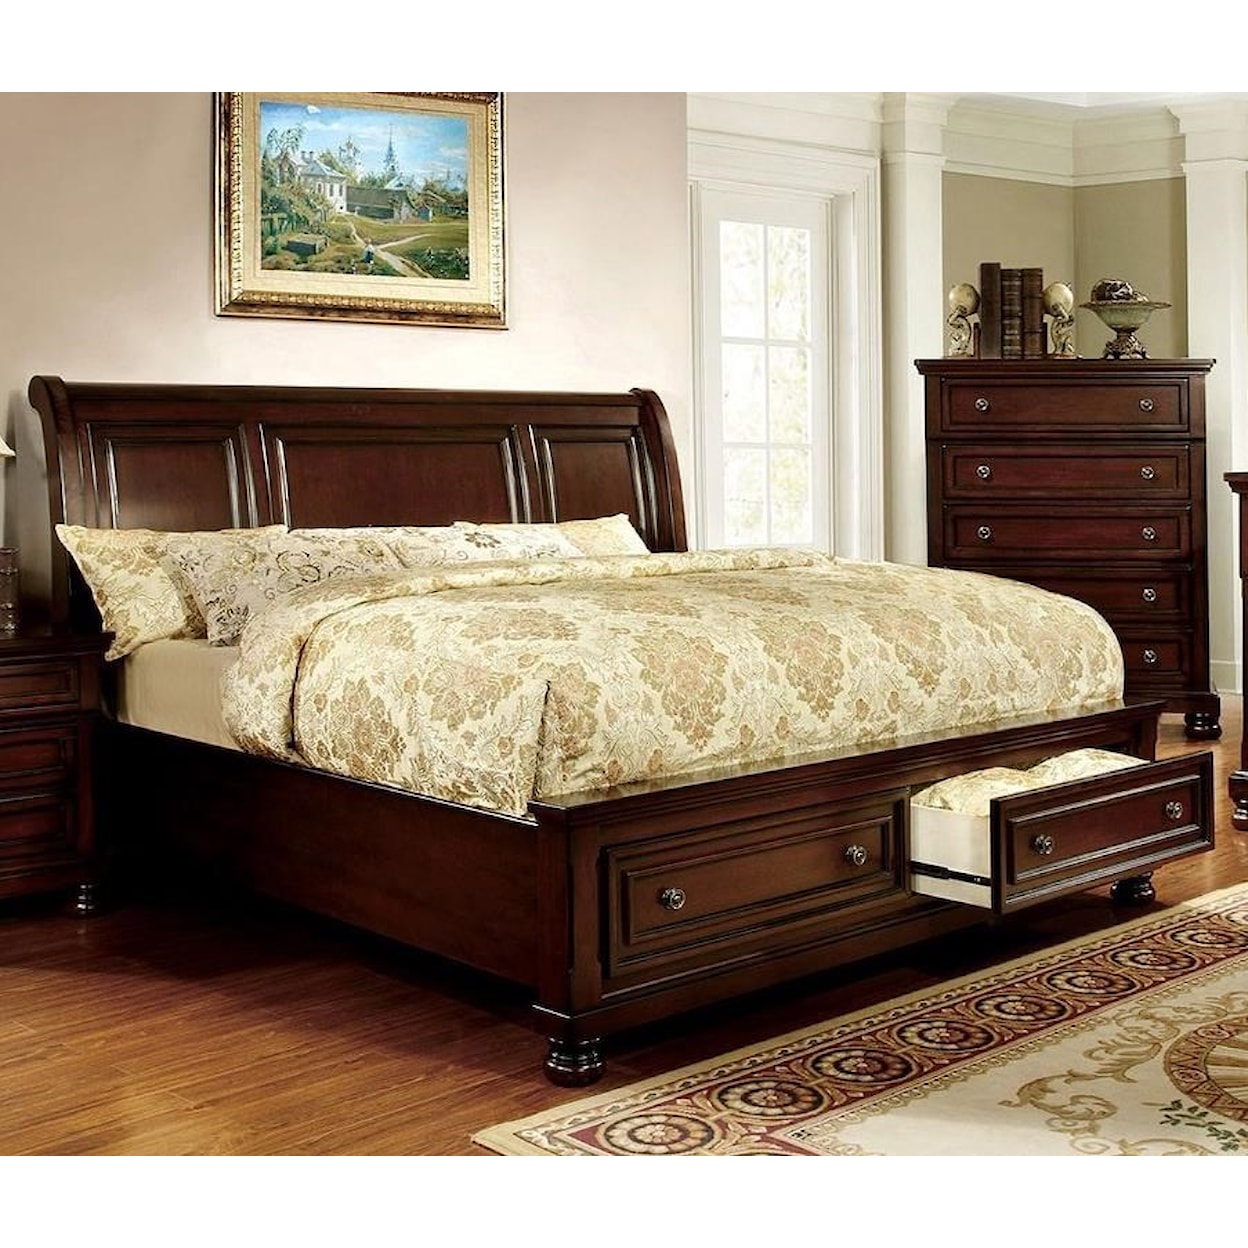 Furniture of America Northville Cal.King Bed